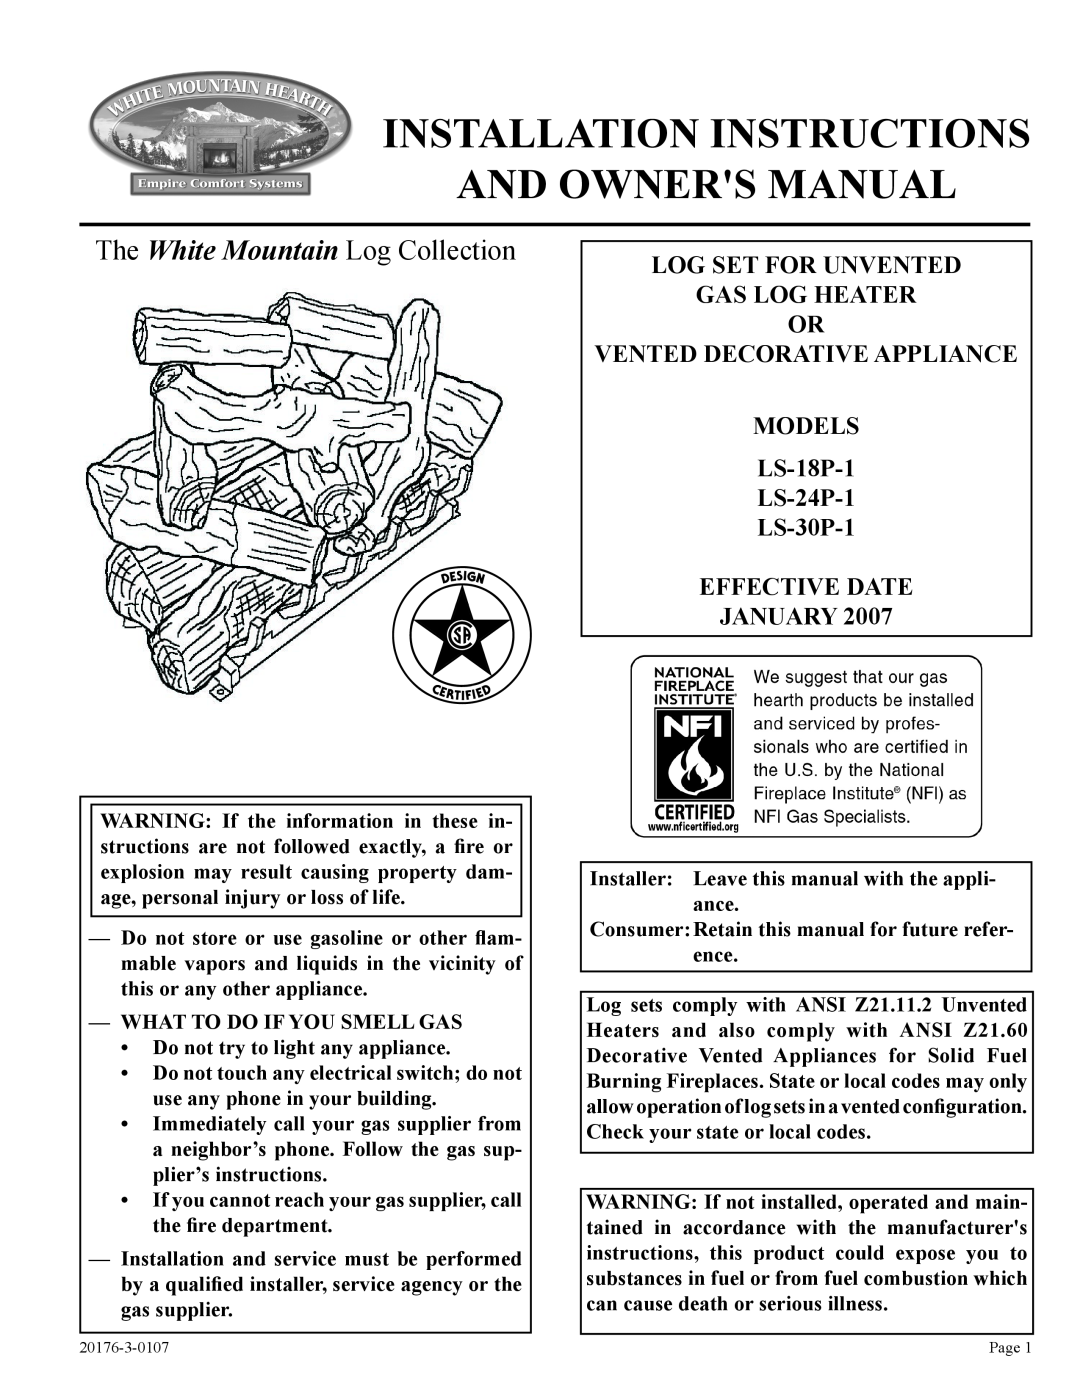 Empire Comfort Systems LS-18P-1, LS-30P-1, LS-24P-1 installation instructions The White Mountain Log Collection 